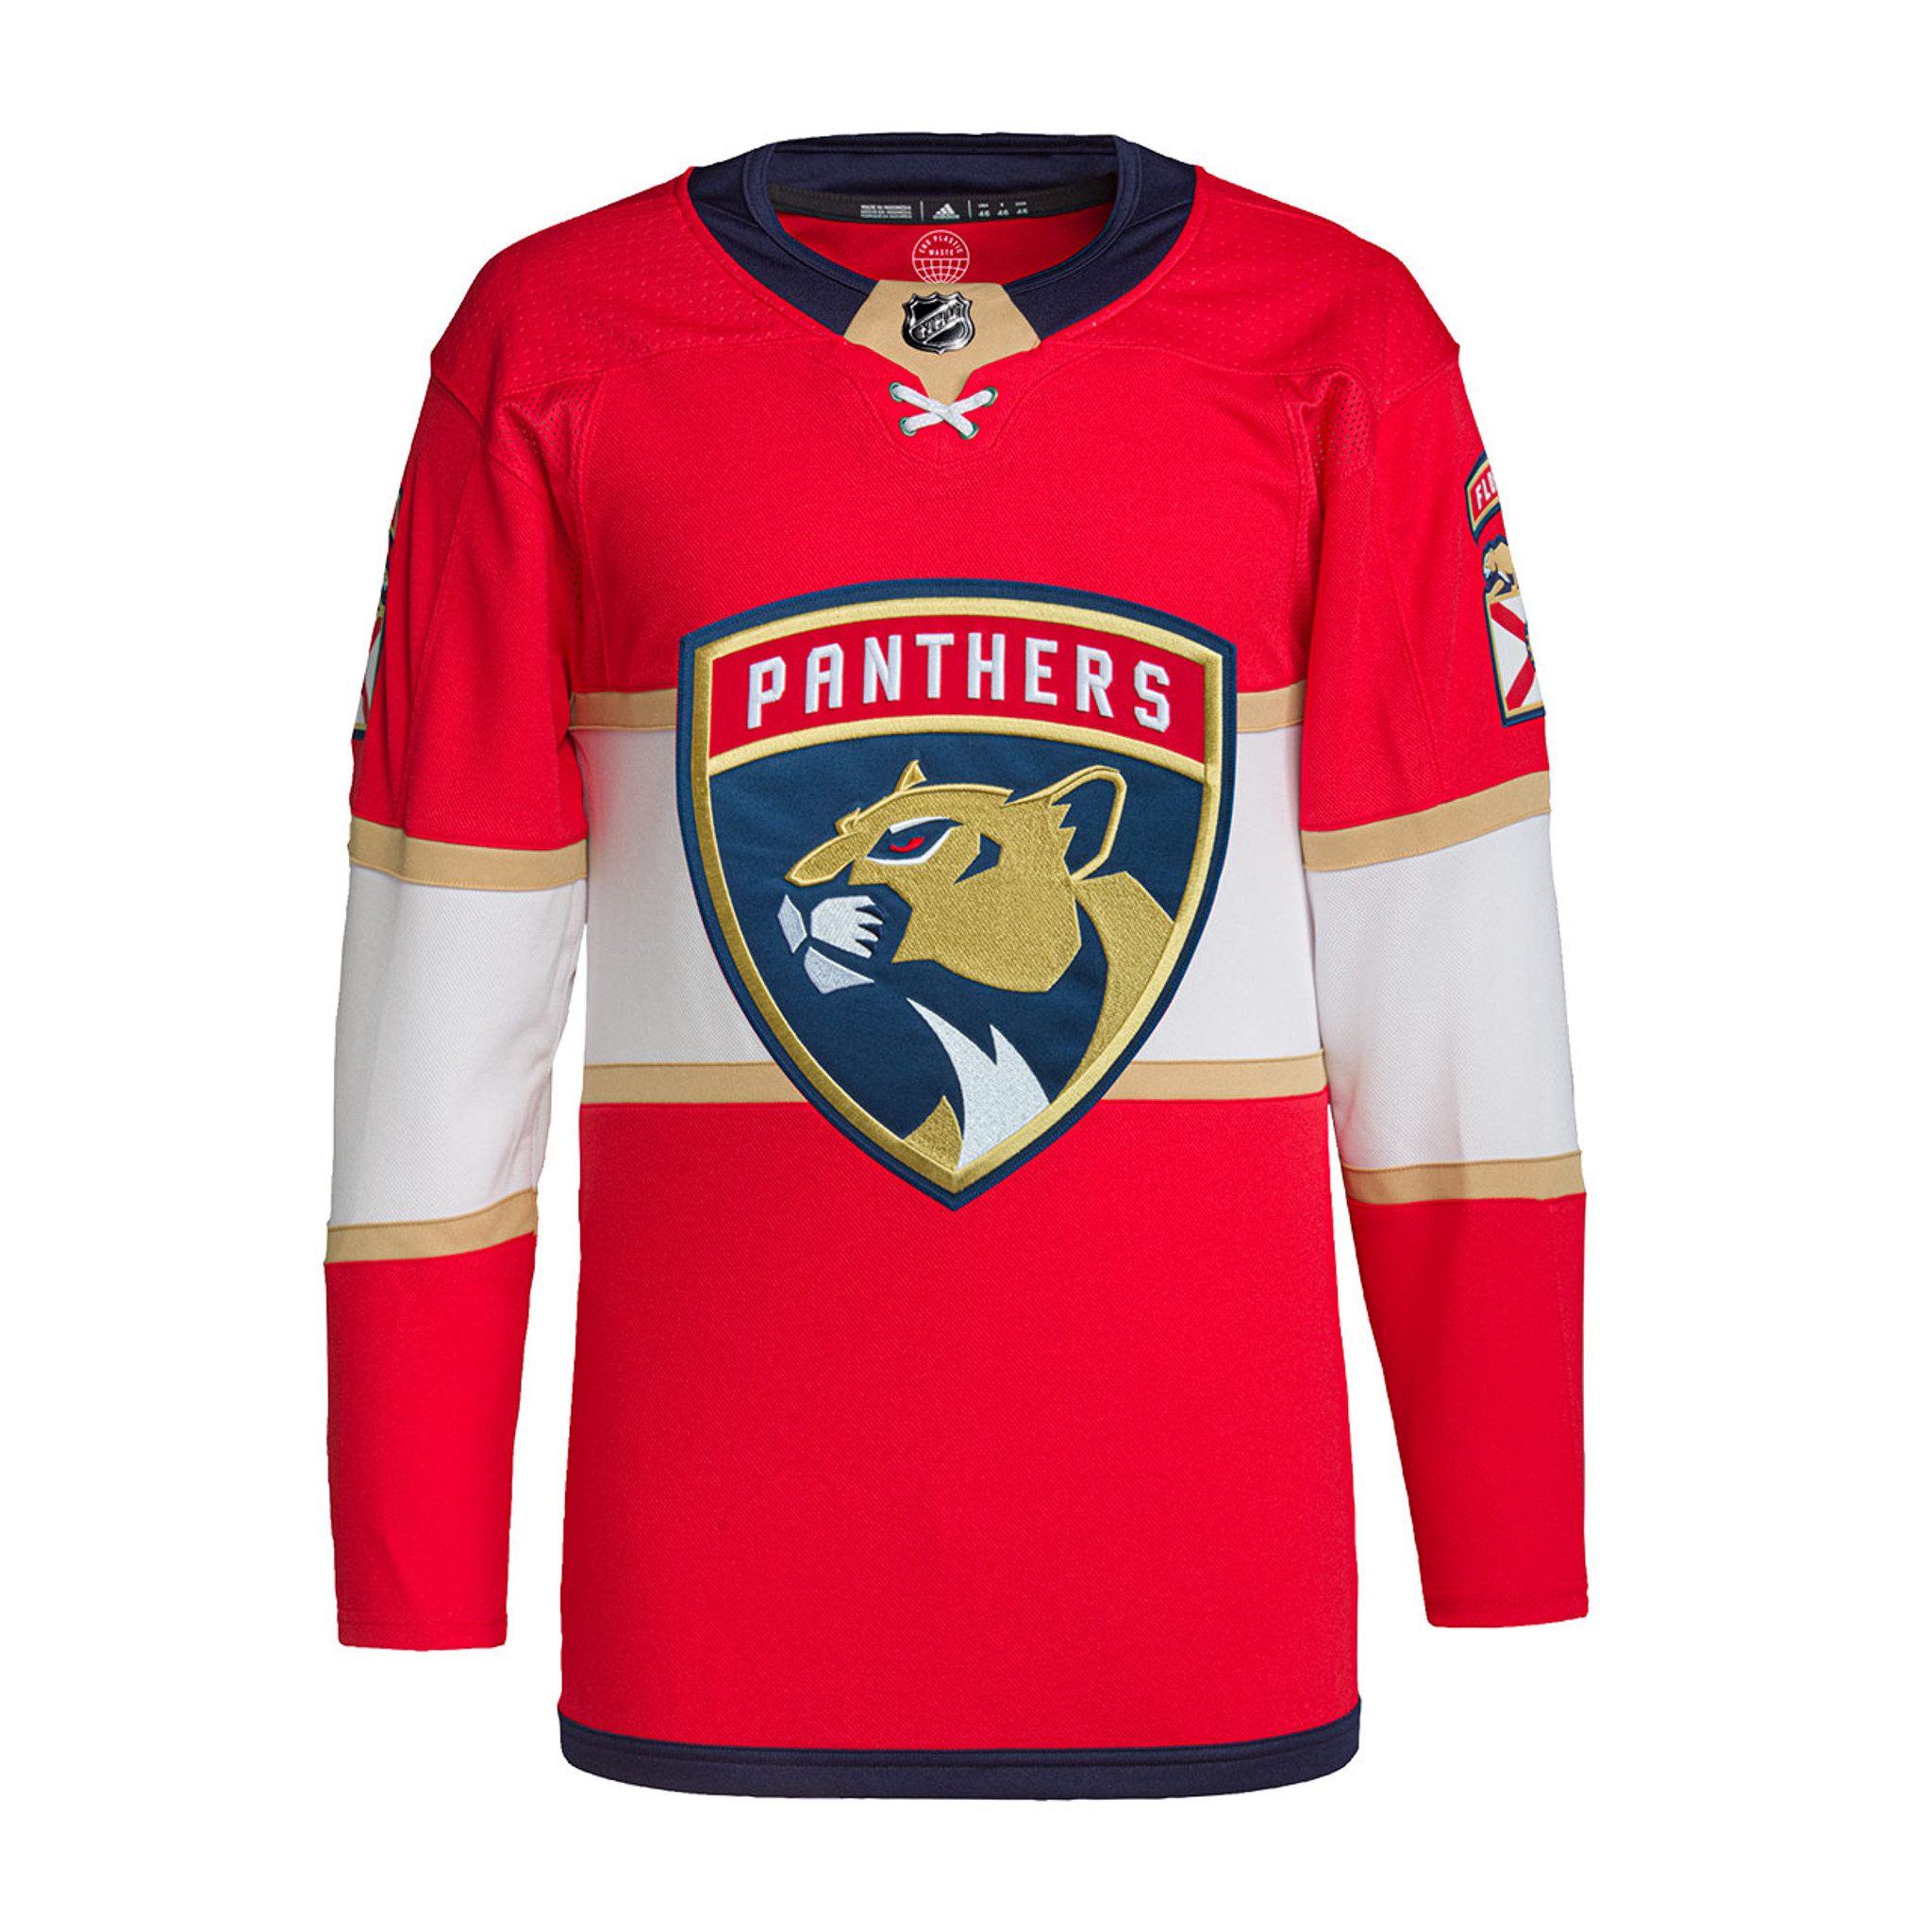  adidas Florida Panthers Primegreen Authentic Road Men's Jersey  (as1, Alpha, s, Regular, Regular, 46/Small) White : Sports & Outdoors